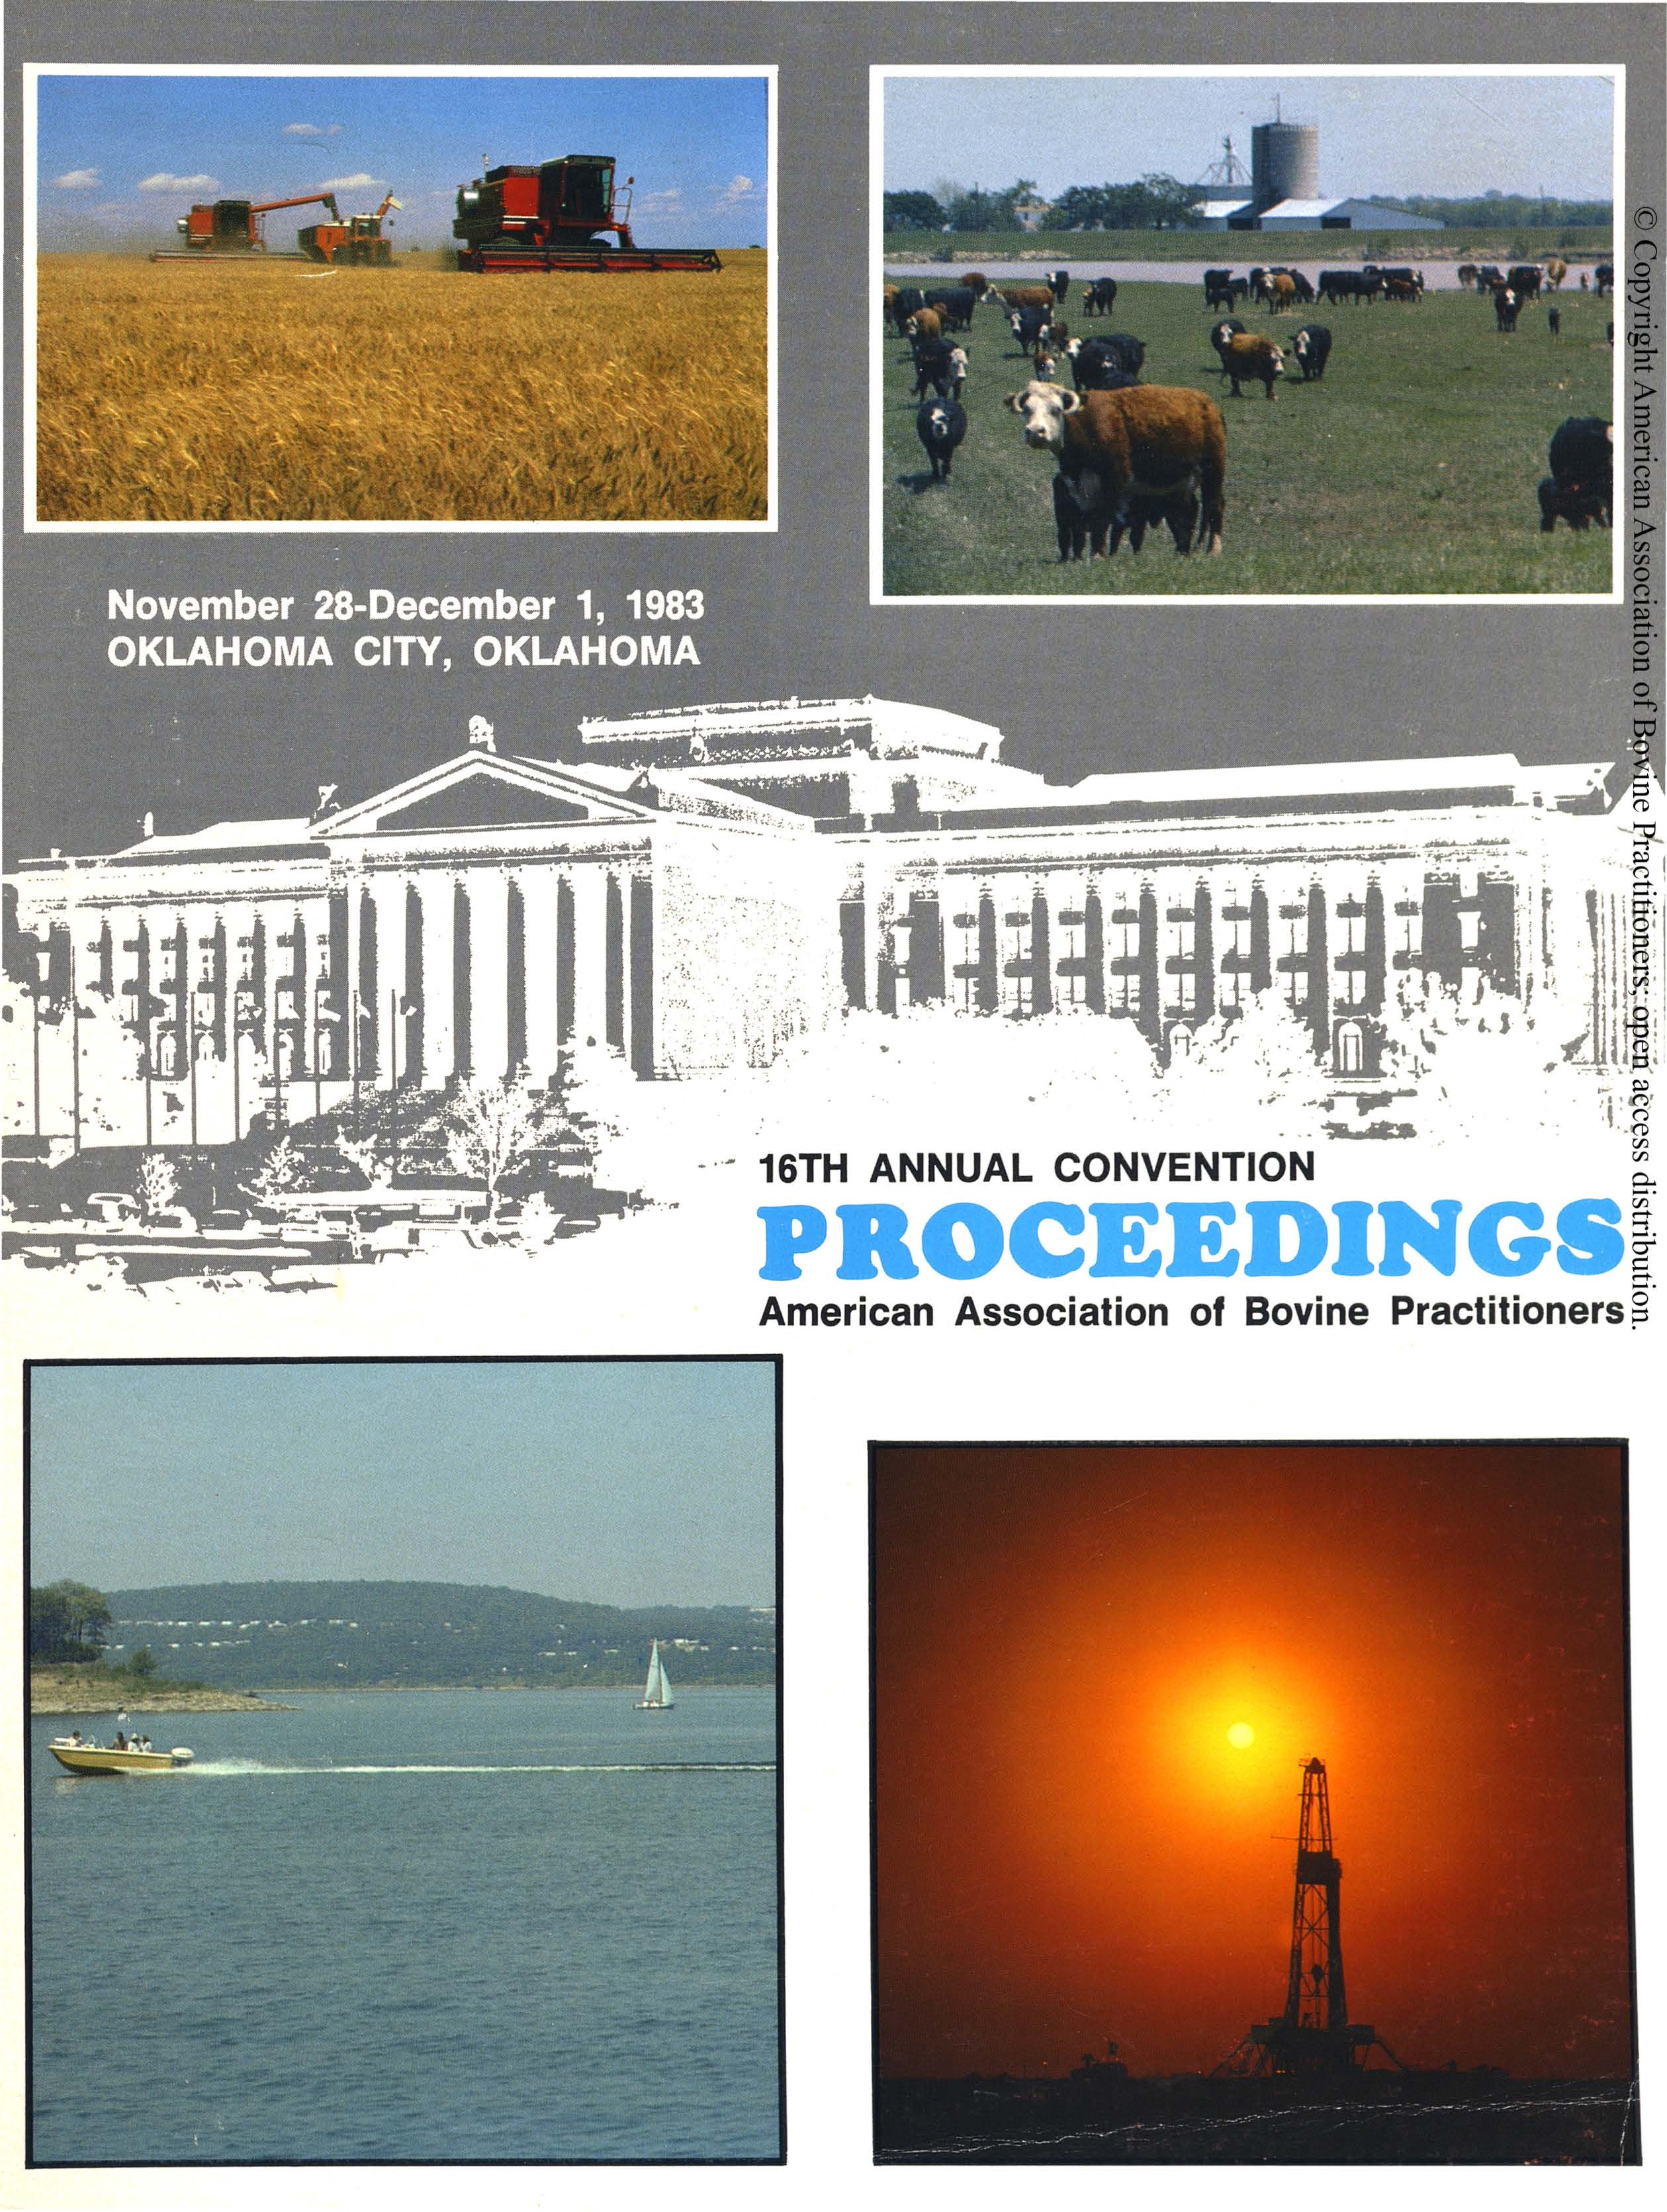 Cover image of the Proceedings of the 16th Annual Convention: Cover image is four photos which symbolize the main industries of Oklahoma (clockwise from upper right: a photo of beef cattle from the James Williams farm, Morrison, OK, a photo of an oil rig at sunset, and a boat skimming across the lake, and a photo of a combine harvester on golden fields) all placed on a white and grey negative image of the Oklahoma State Capitol. The journal name and ennumeration is listed in the middle right.